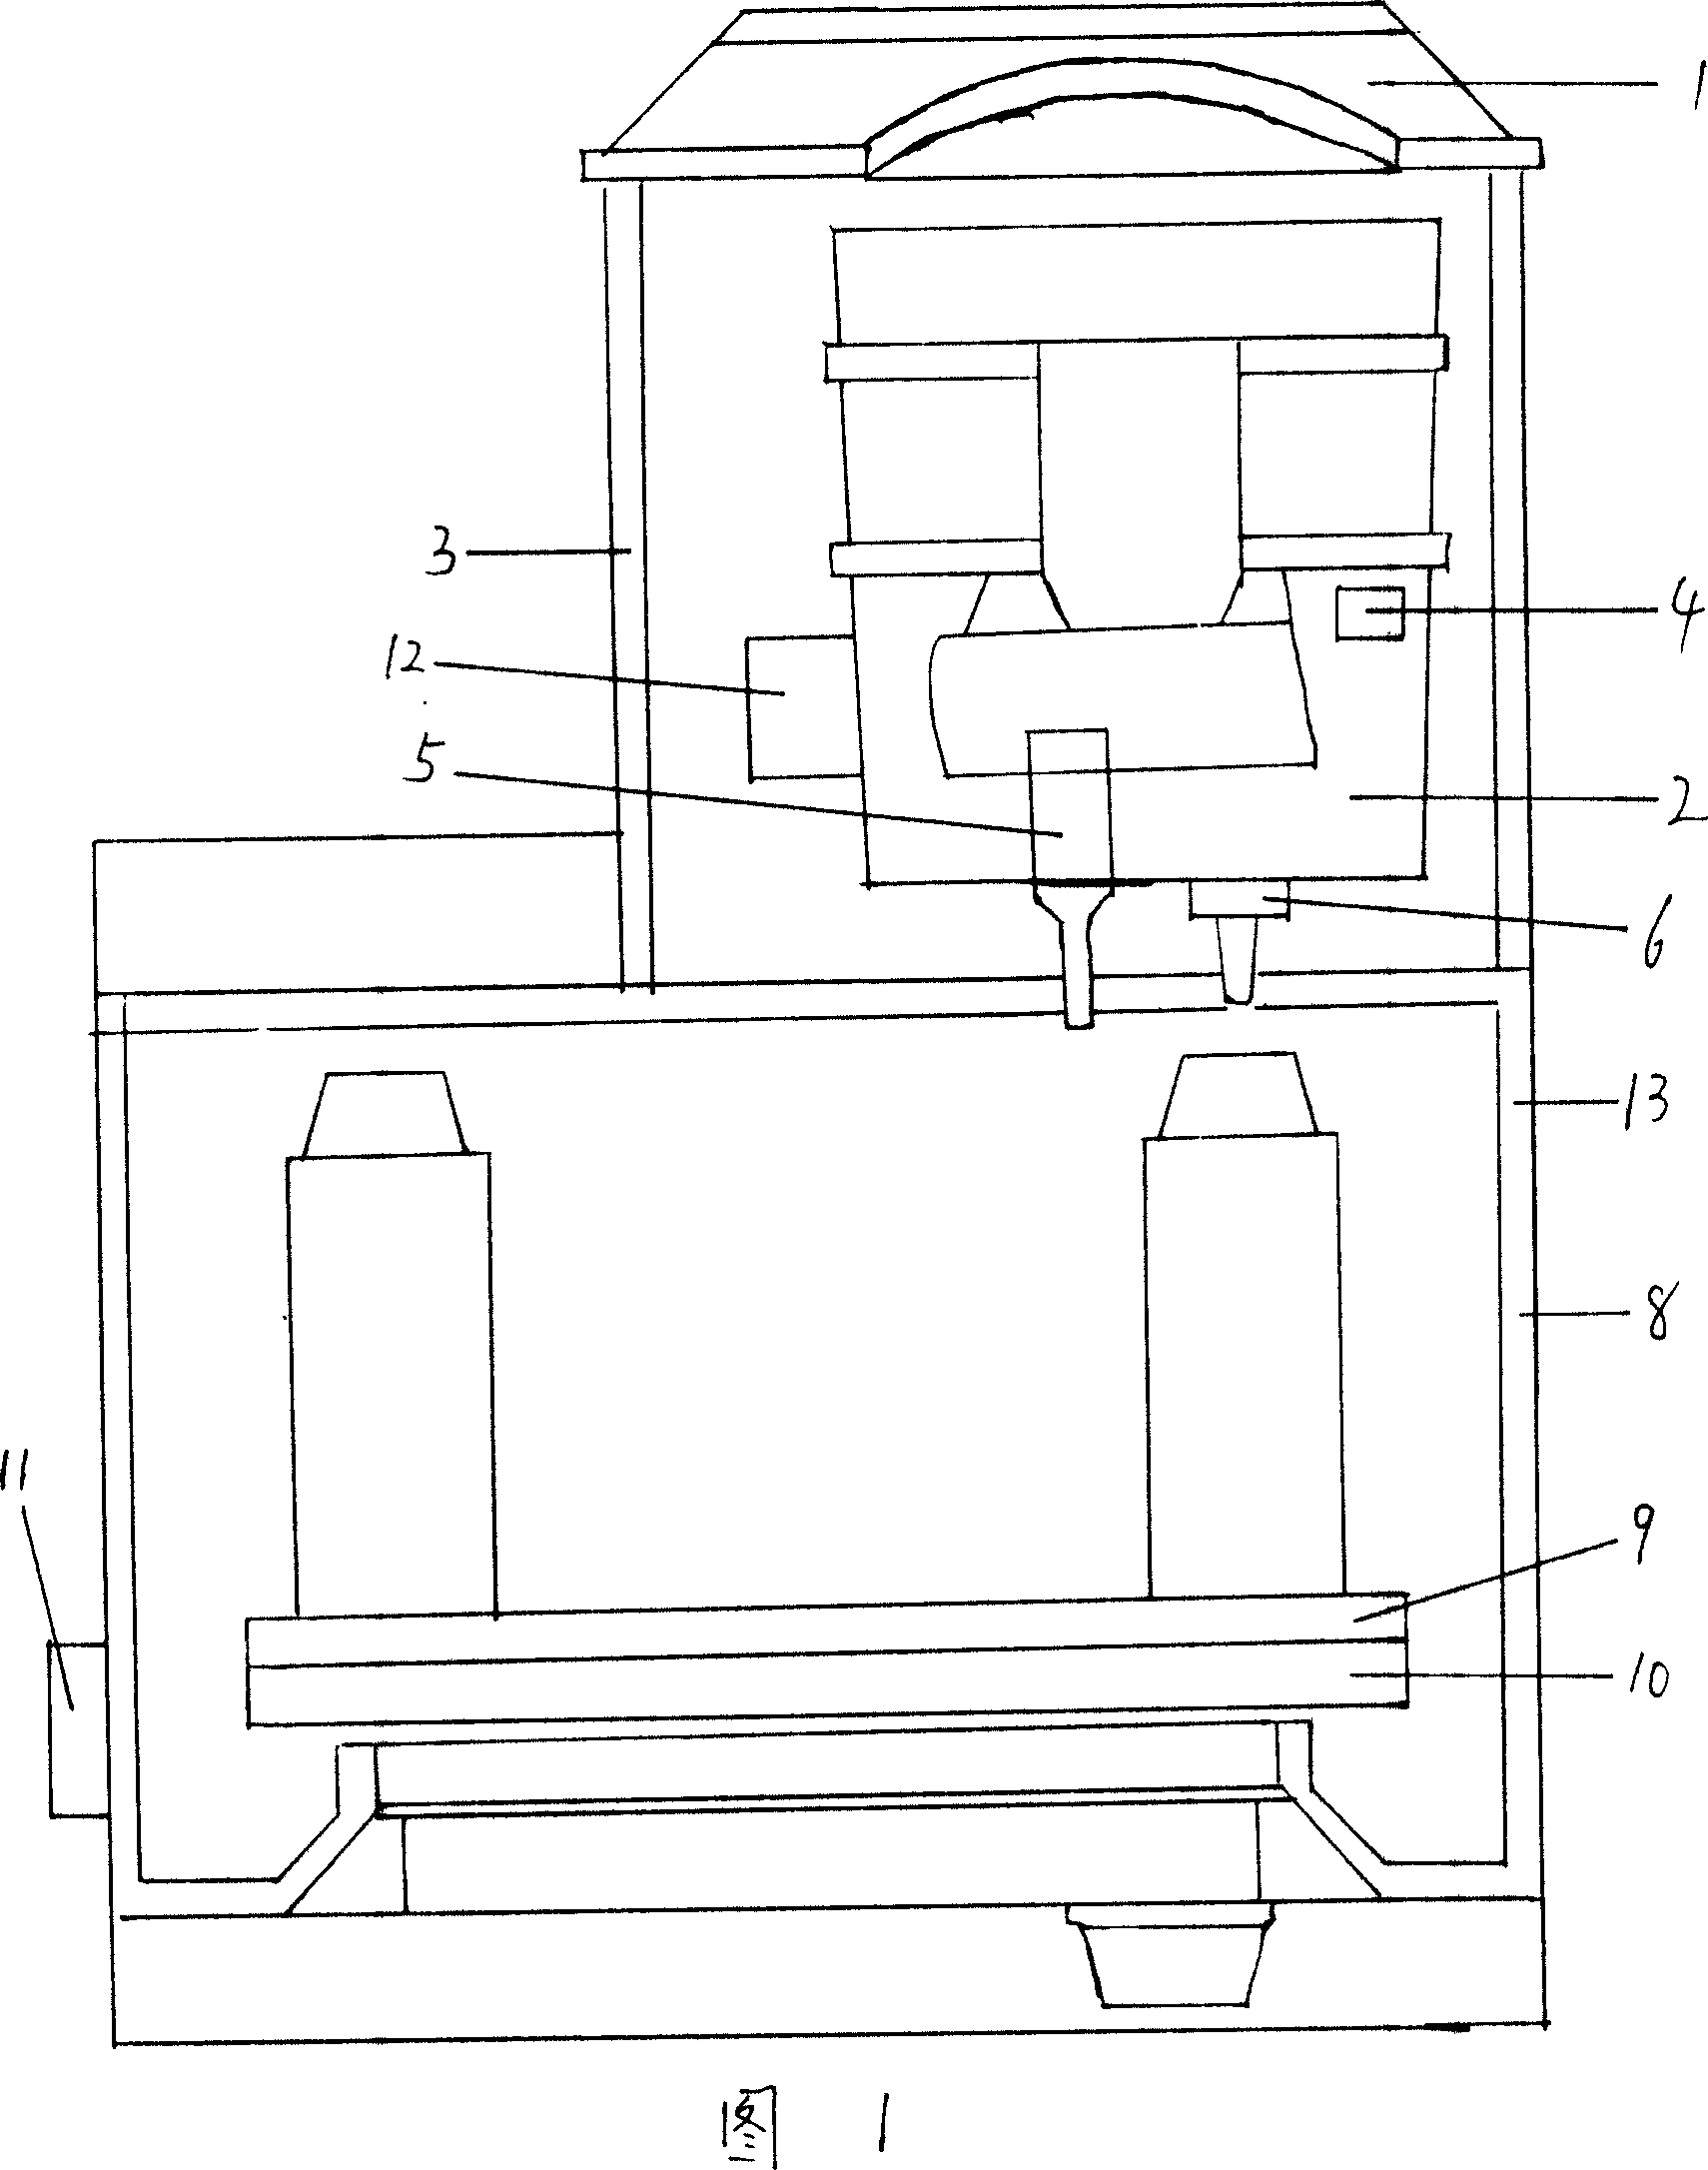 Incorporated manufacturing technique for vacuum steel ladle degassing and vacuum casting a plurality of steel ingots